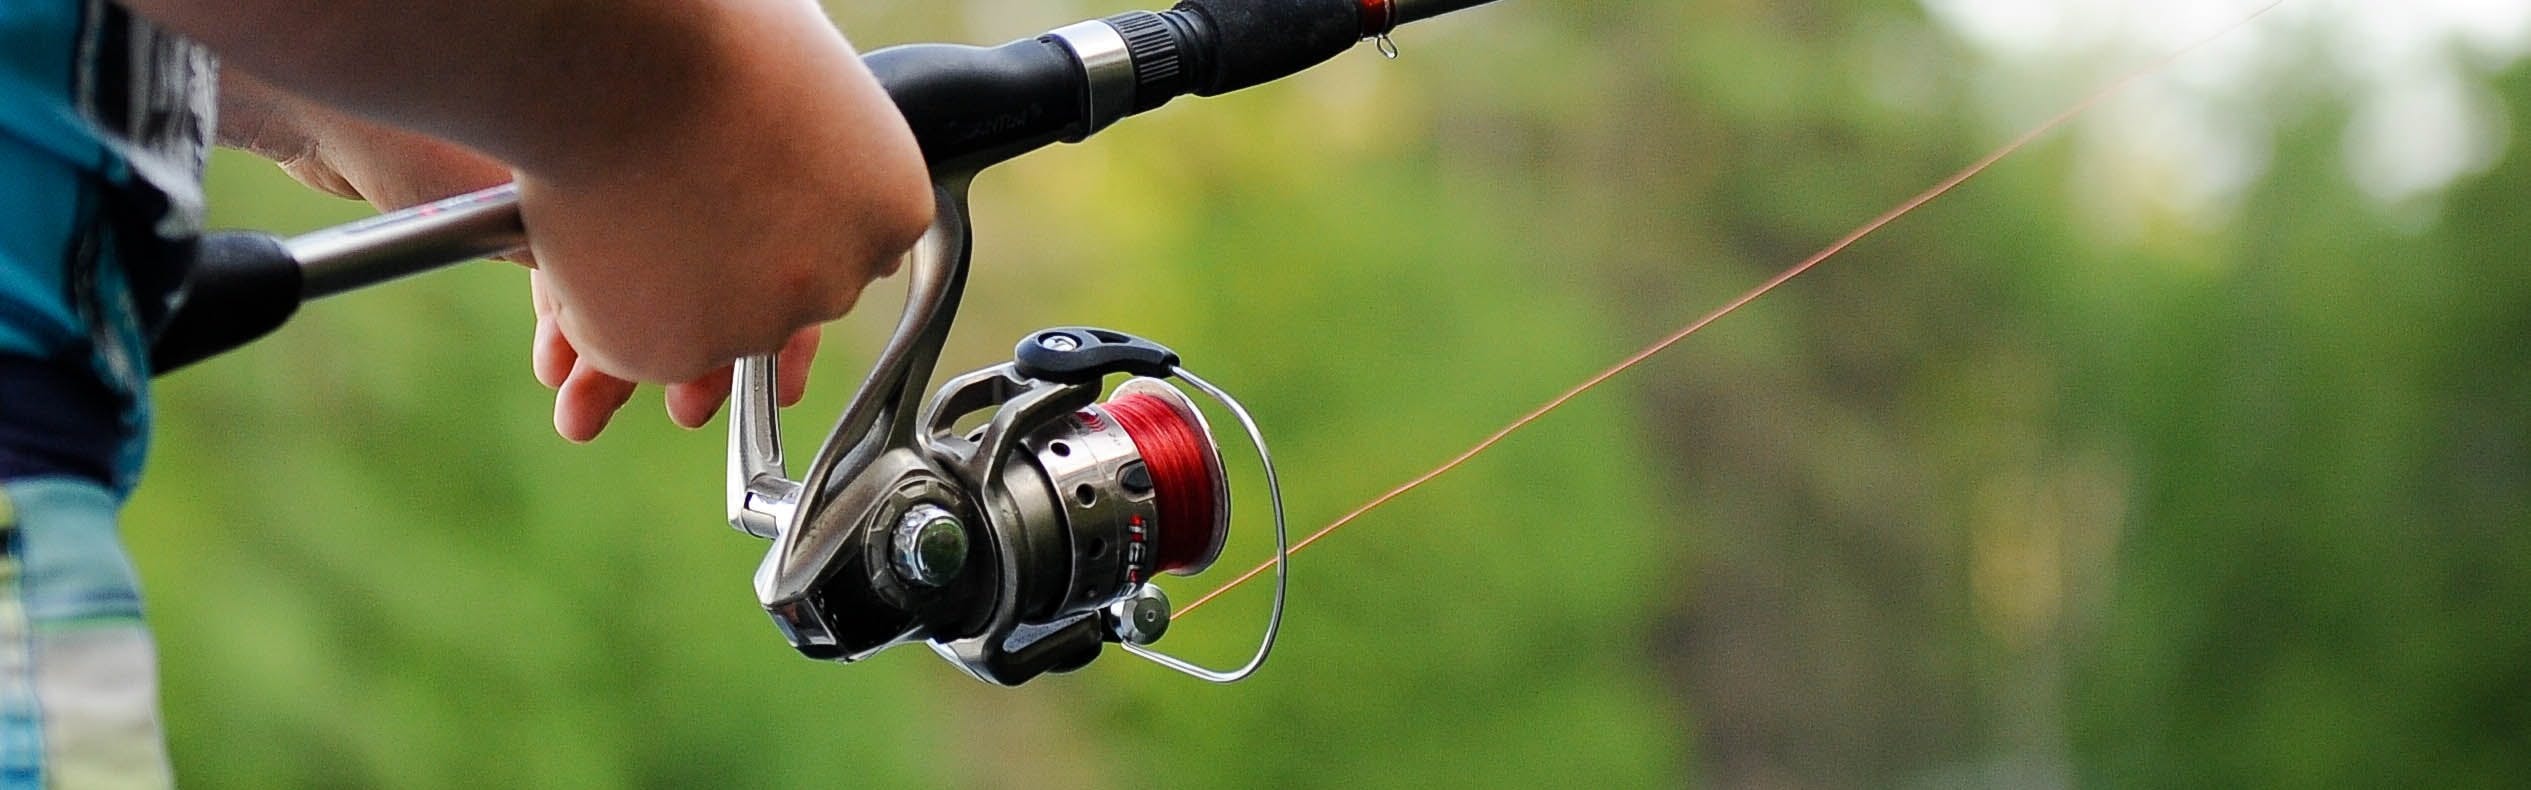 Caring for Your Fishing Gear - The Fishing Website